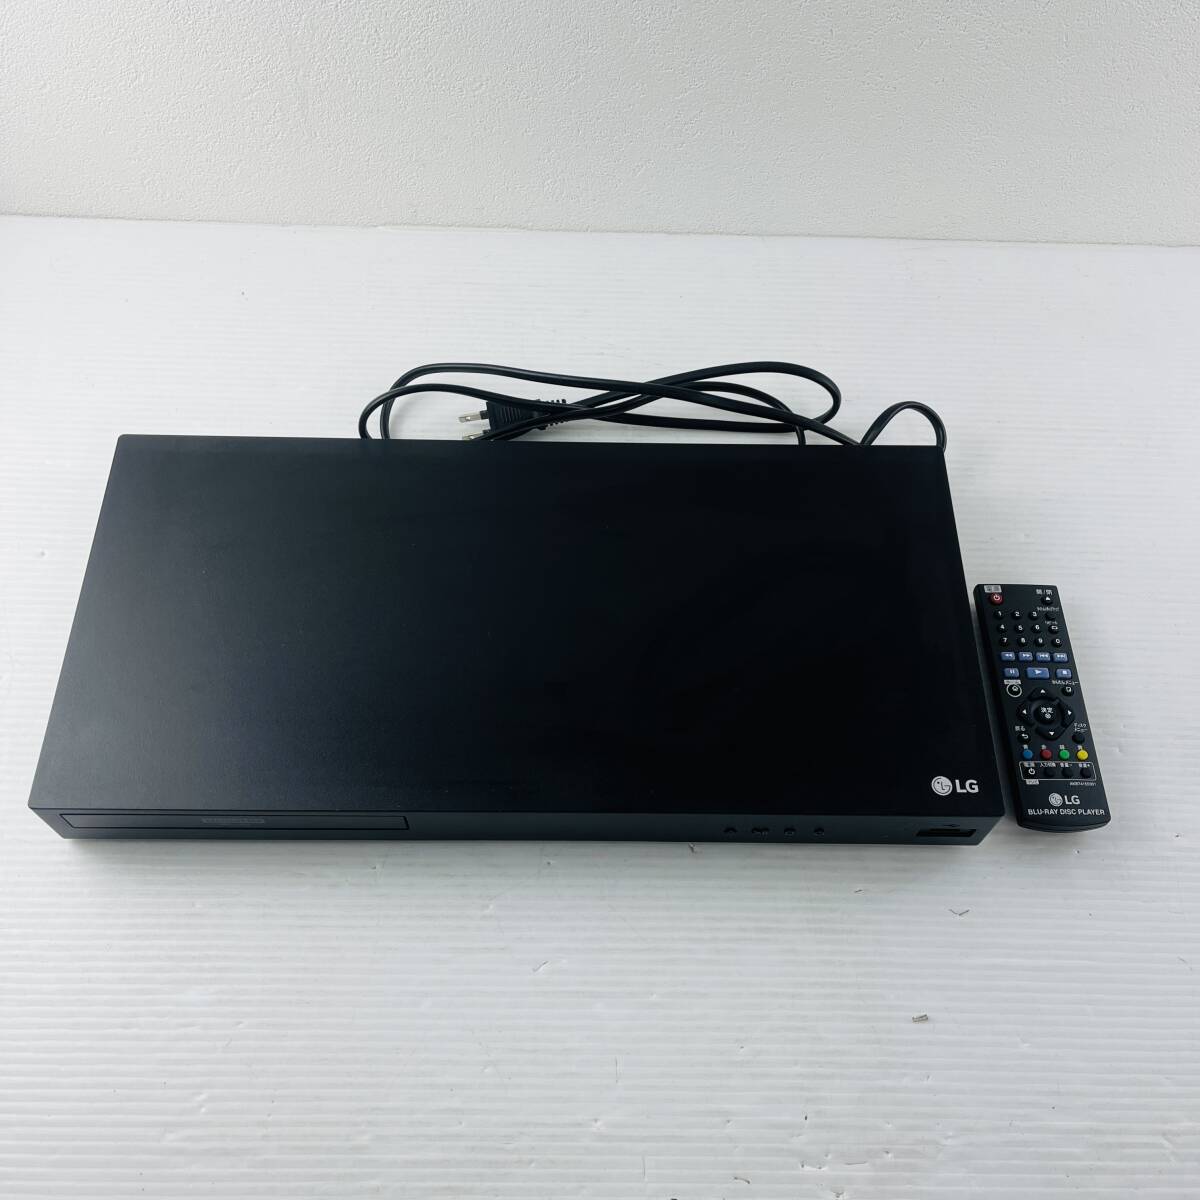 99 electrification OK LG ULTRA HD Blue-ray player body Ultra Blu-ray disk player body remote control attaching details not yet verification Junk 